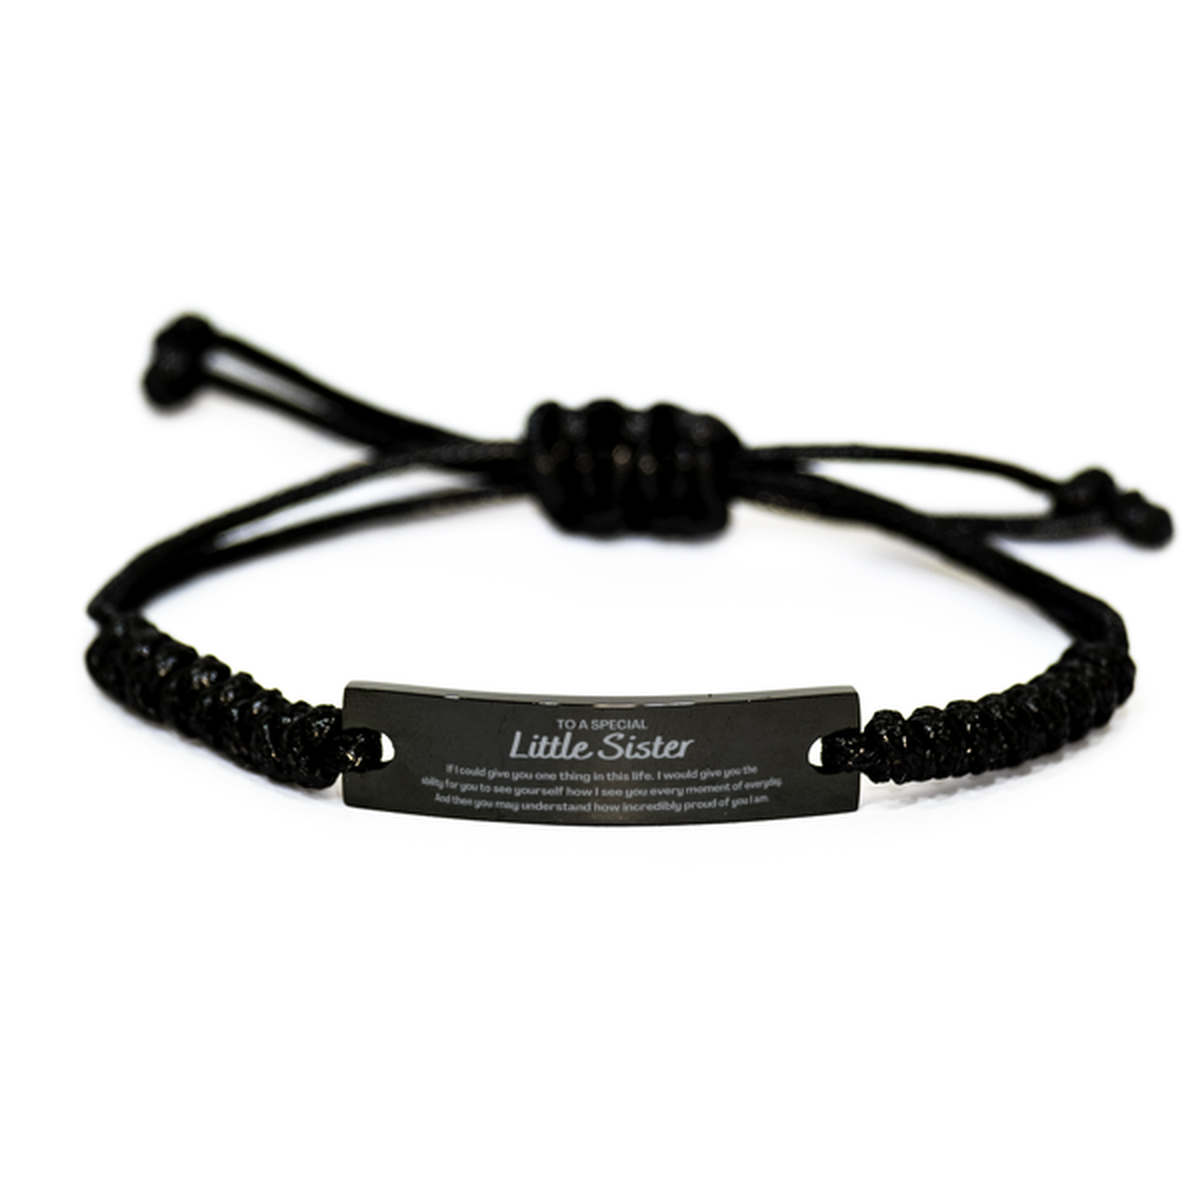 To My Little Sister Black Rope Bracelet, Gifts For Little Sister Engraved, Inspirational Gifts for Christmas Birthday, Epic Gifts for Little Sister To A Special Little Sister how incredibly proud of you I am